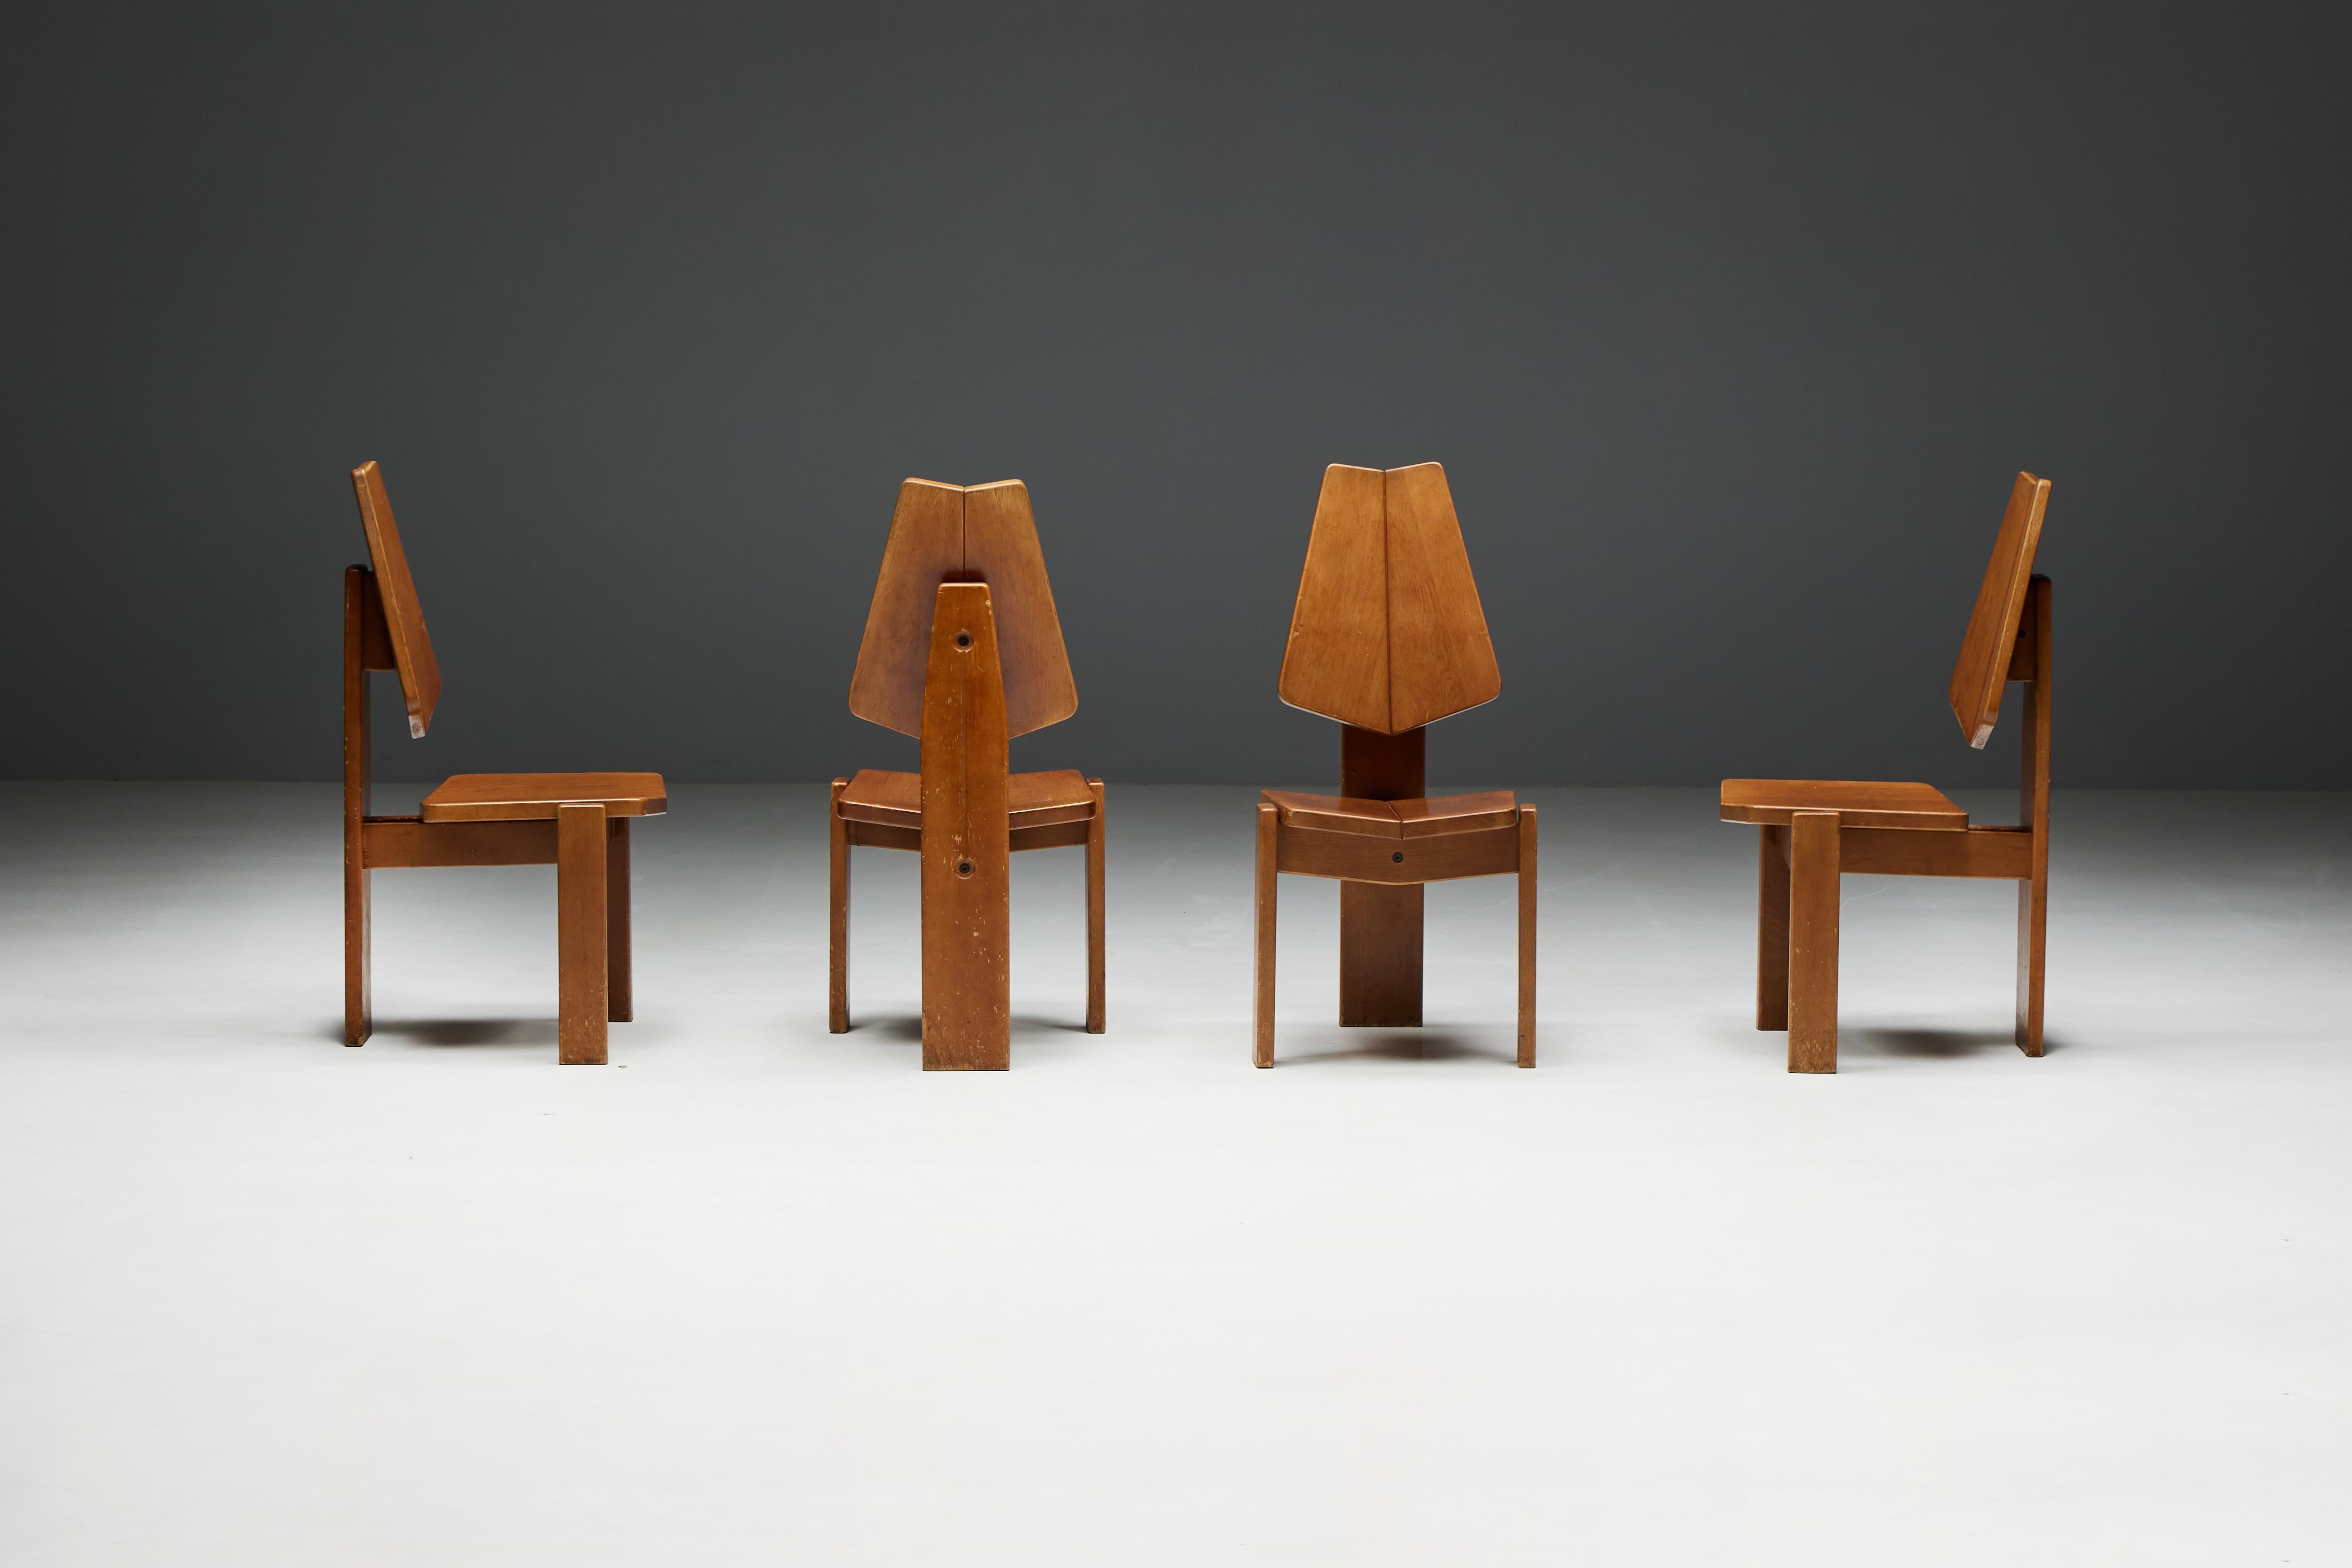 Brutalist Wooden Dining Chairs, Belgium, 1970s In Excellent Condition For Sale In Antwerp, BE